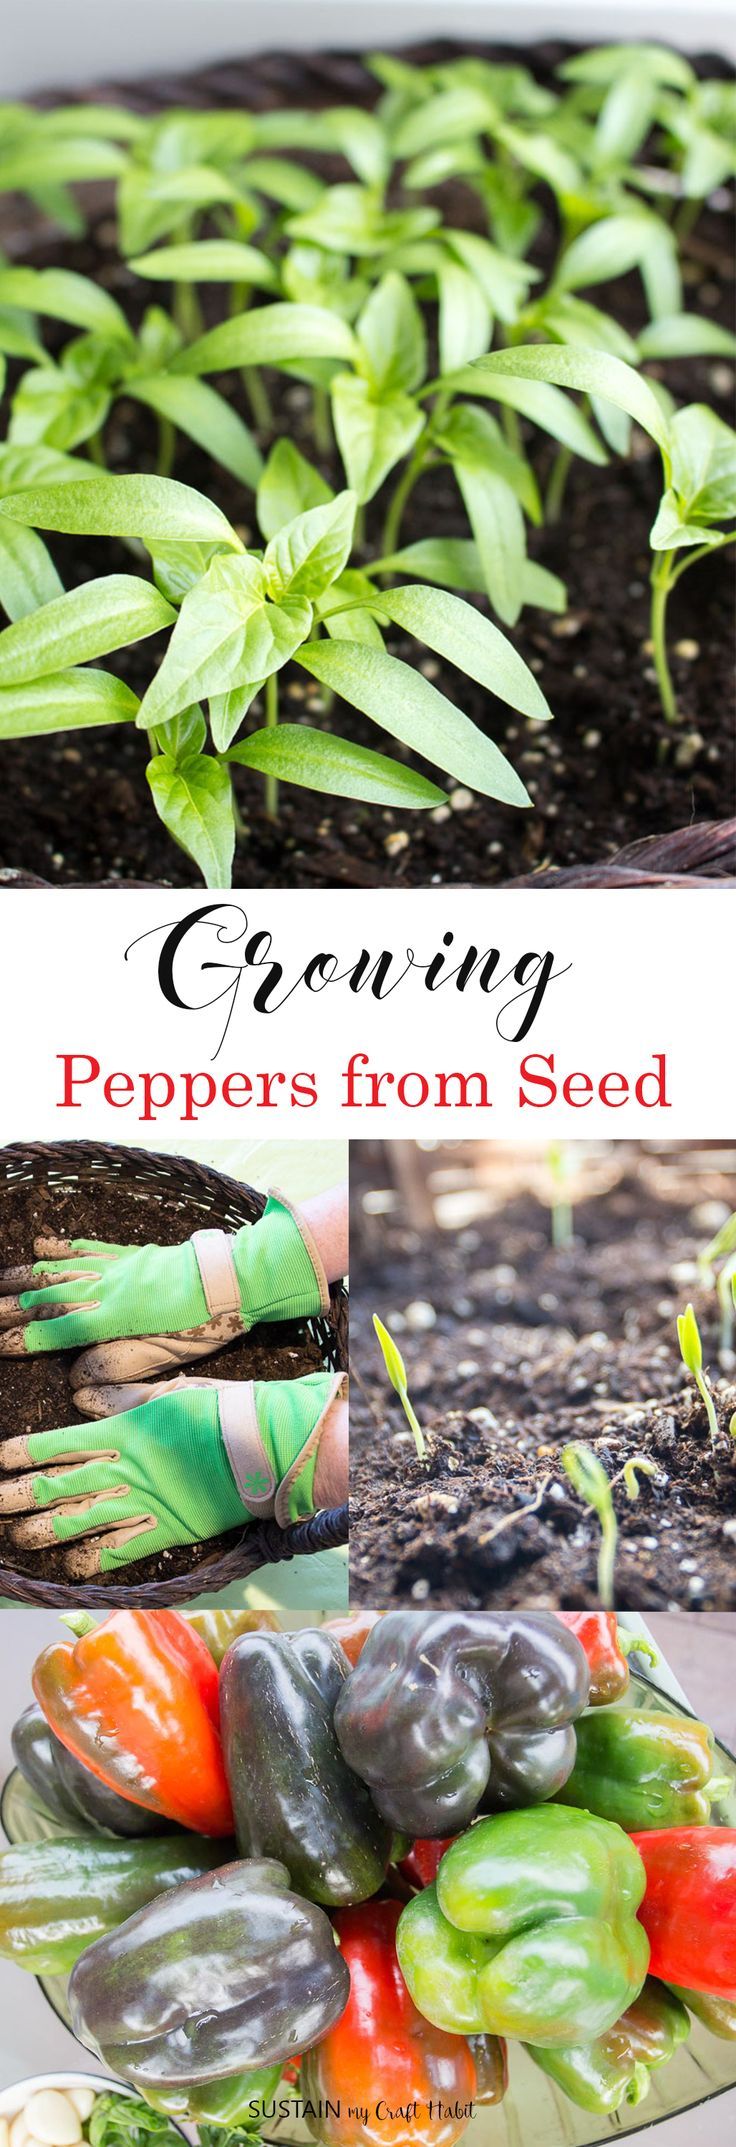 Growing peppers from seed is easy, fun and inexpensive! Get the how to instructi...